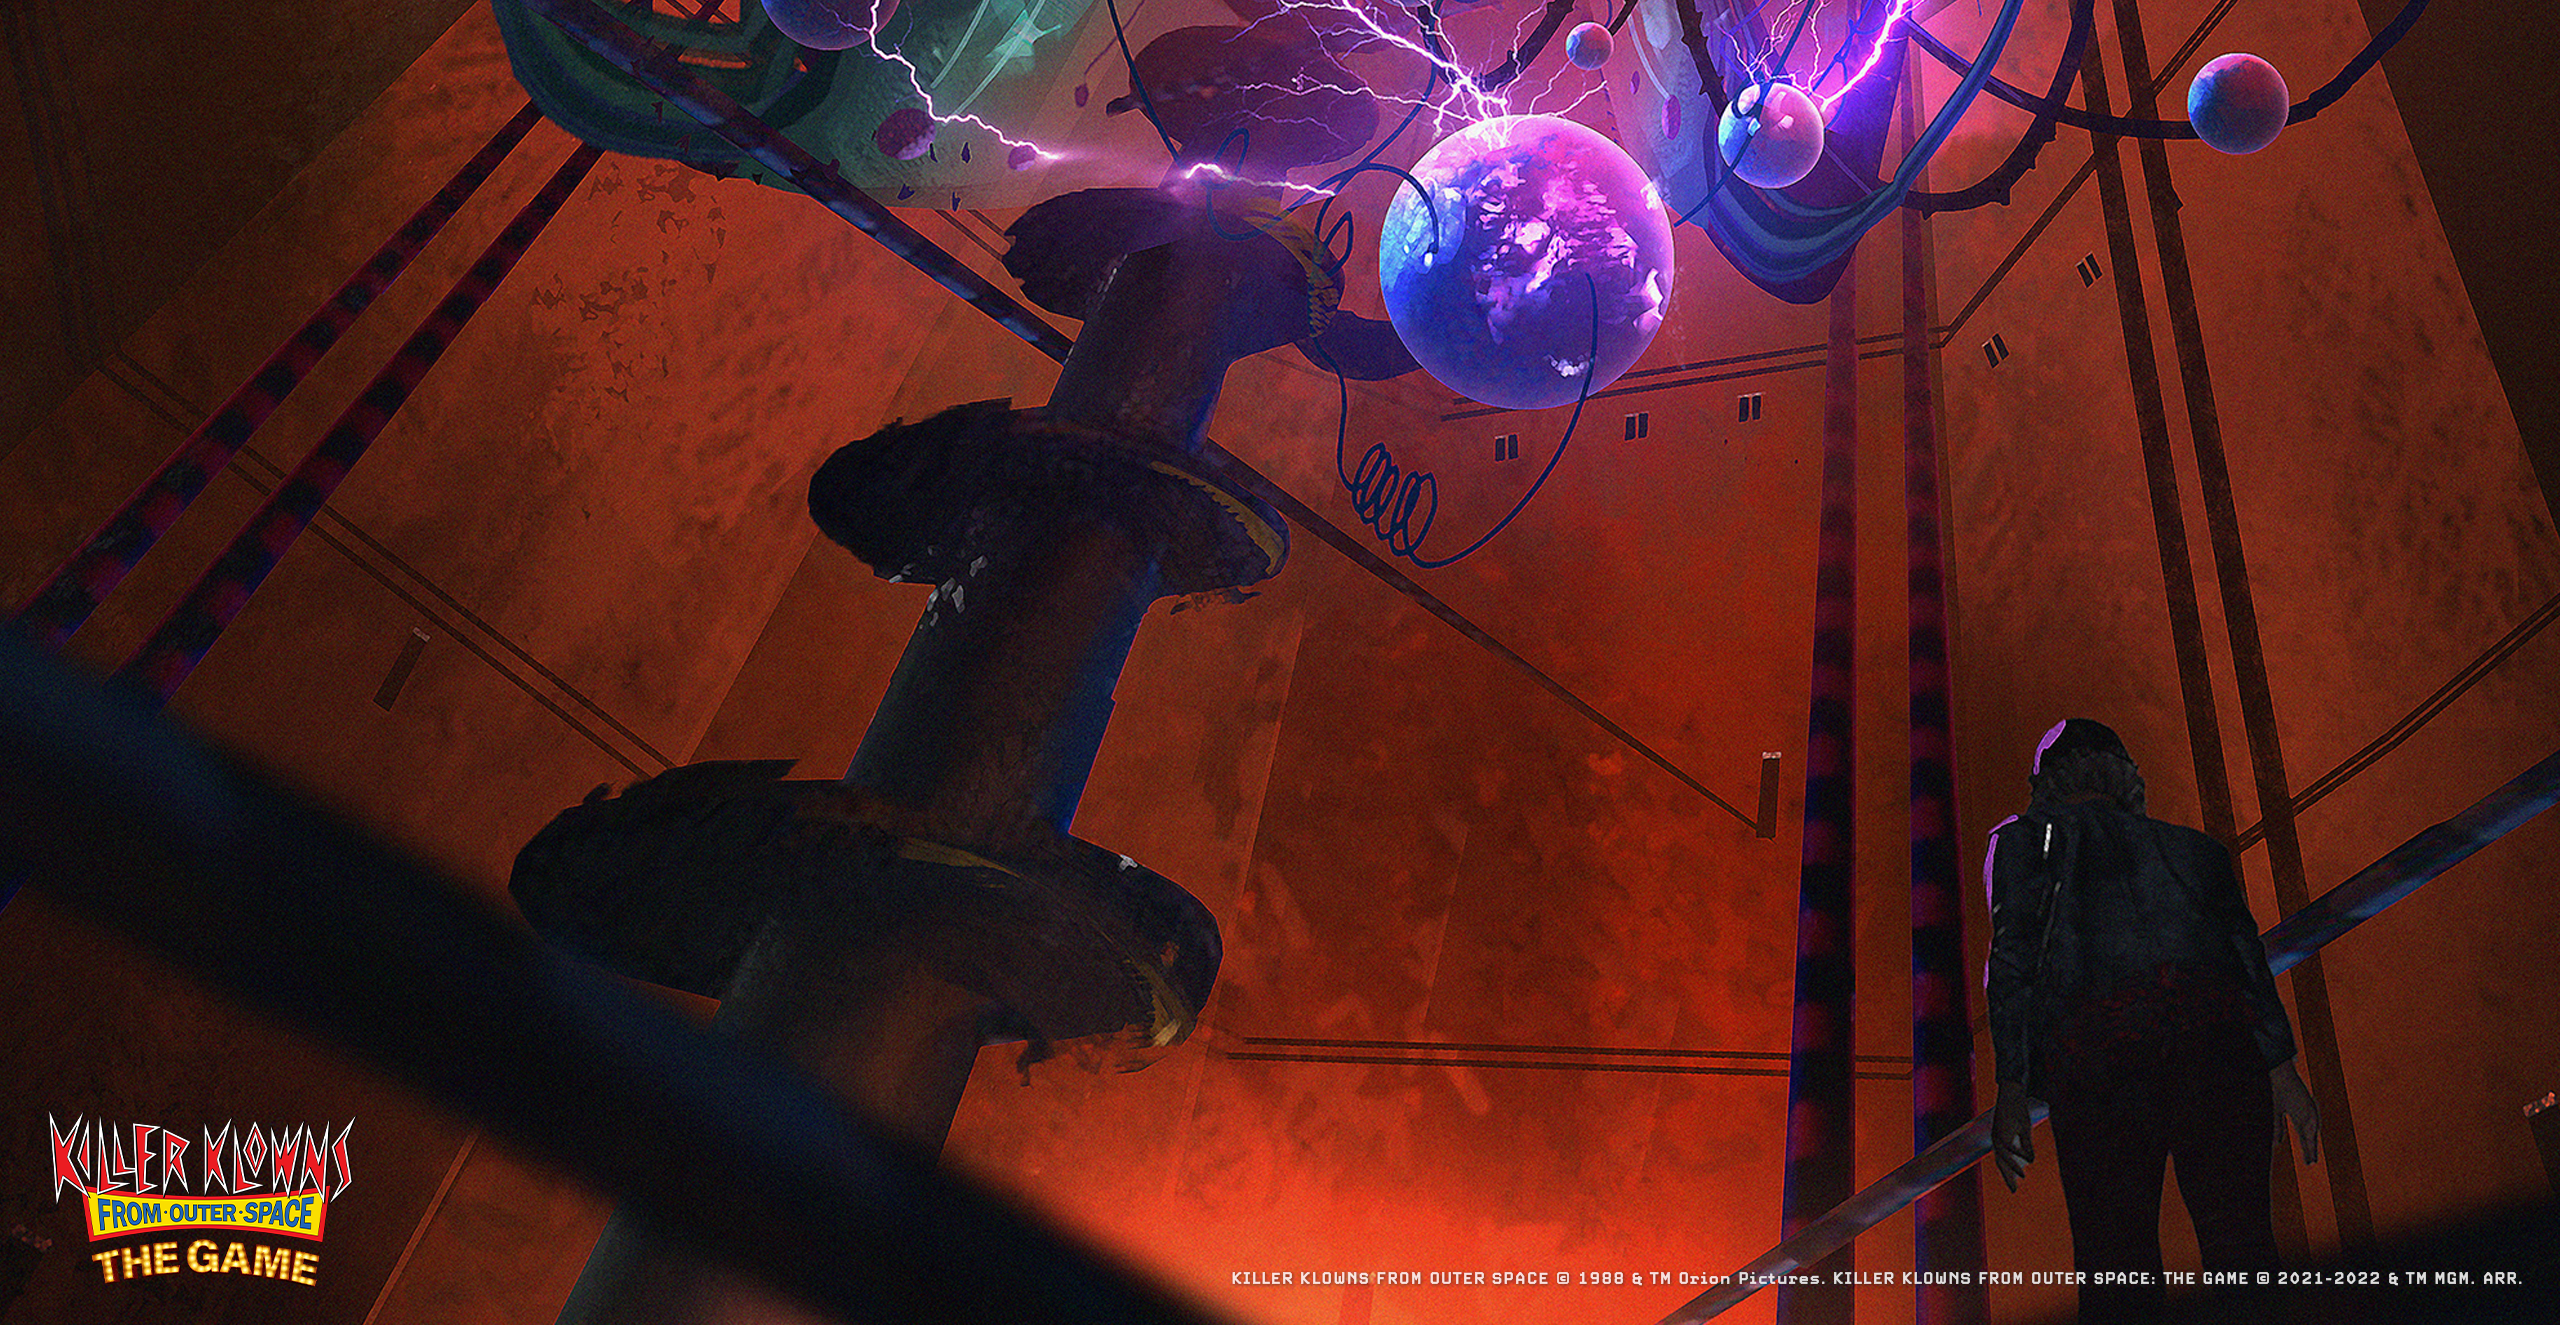 Concept art from Killer Klowns from Outer Space the Game showing the inside of the Klowns space ship with a glowing purple core